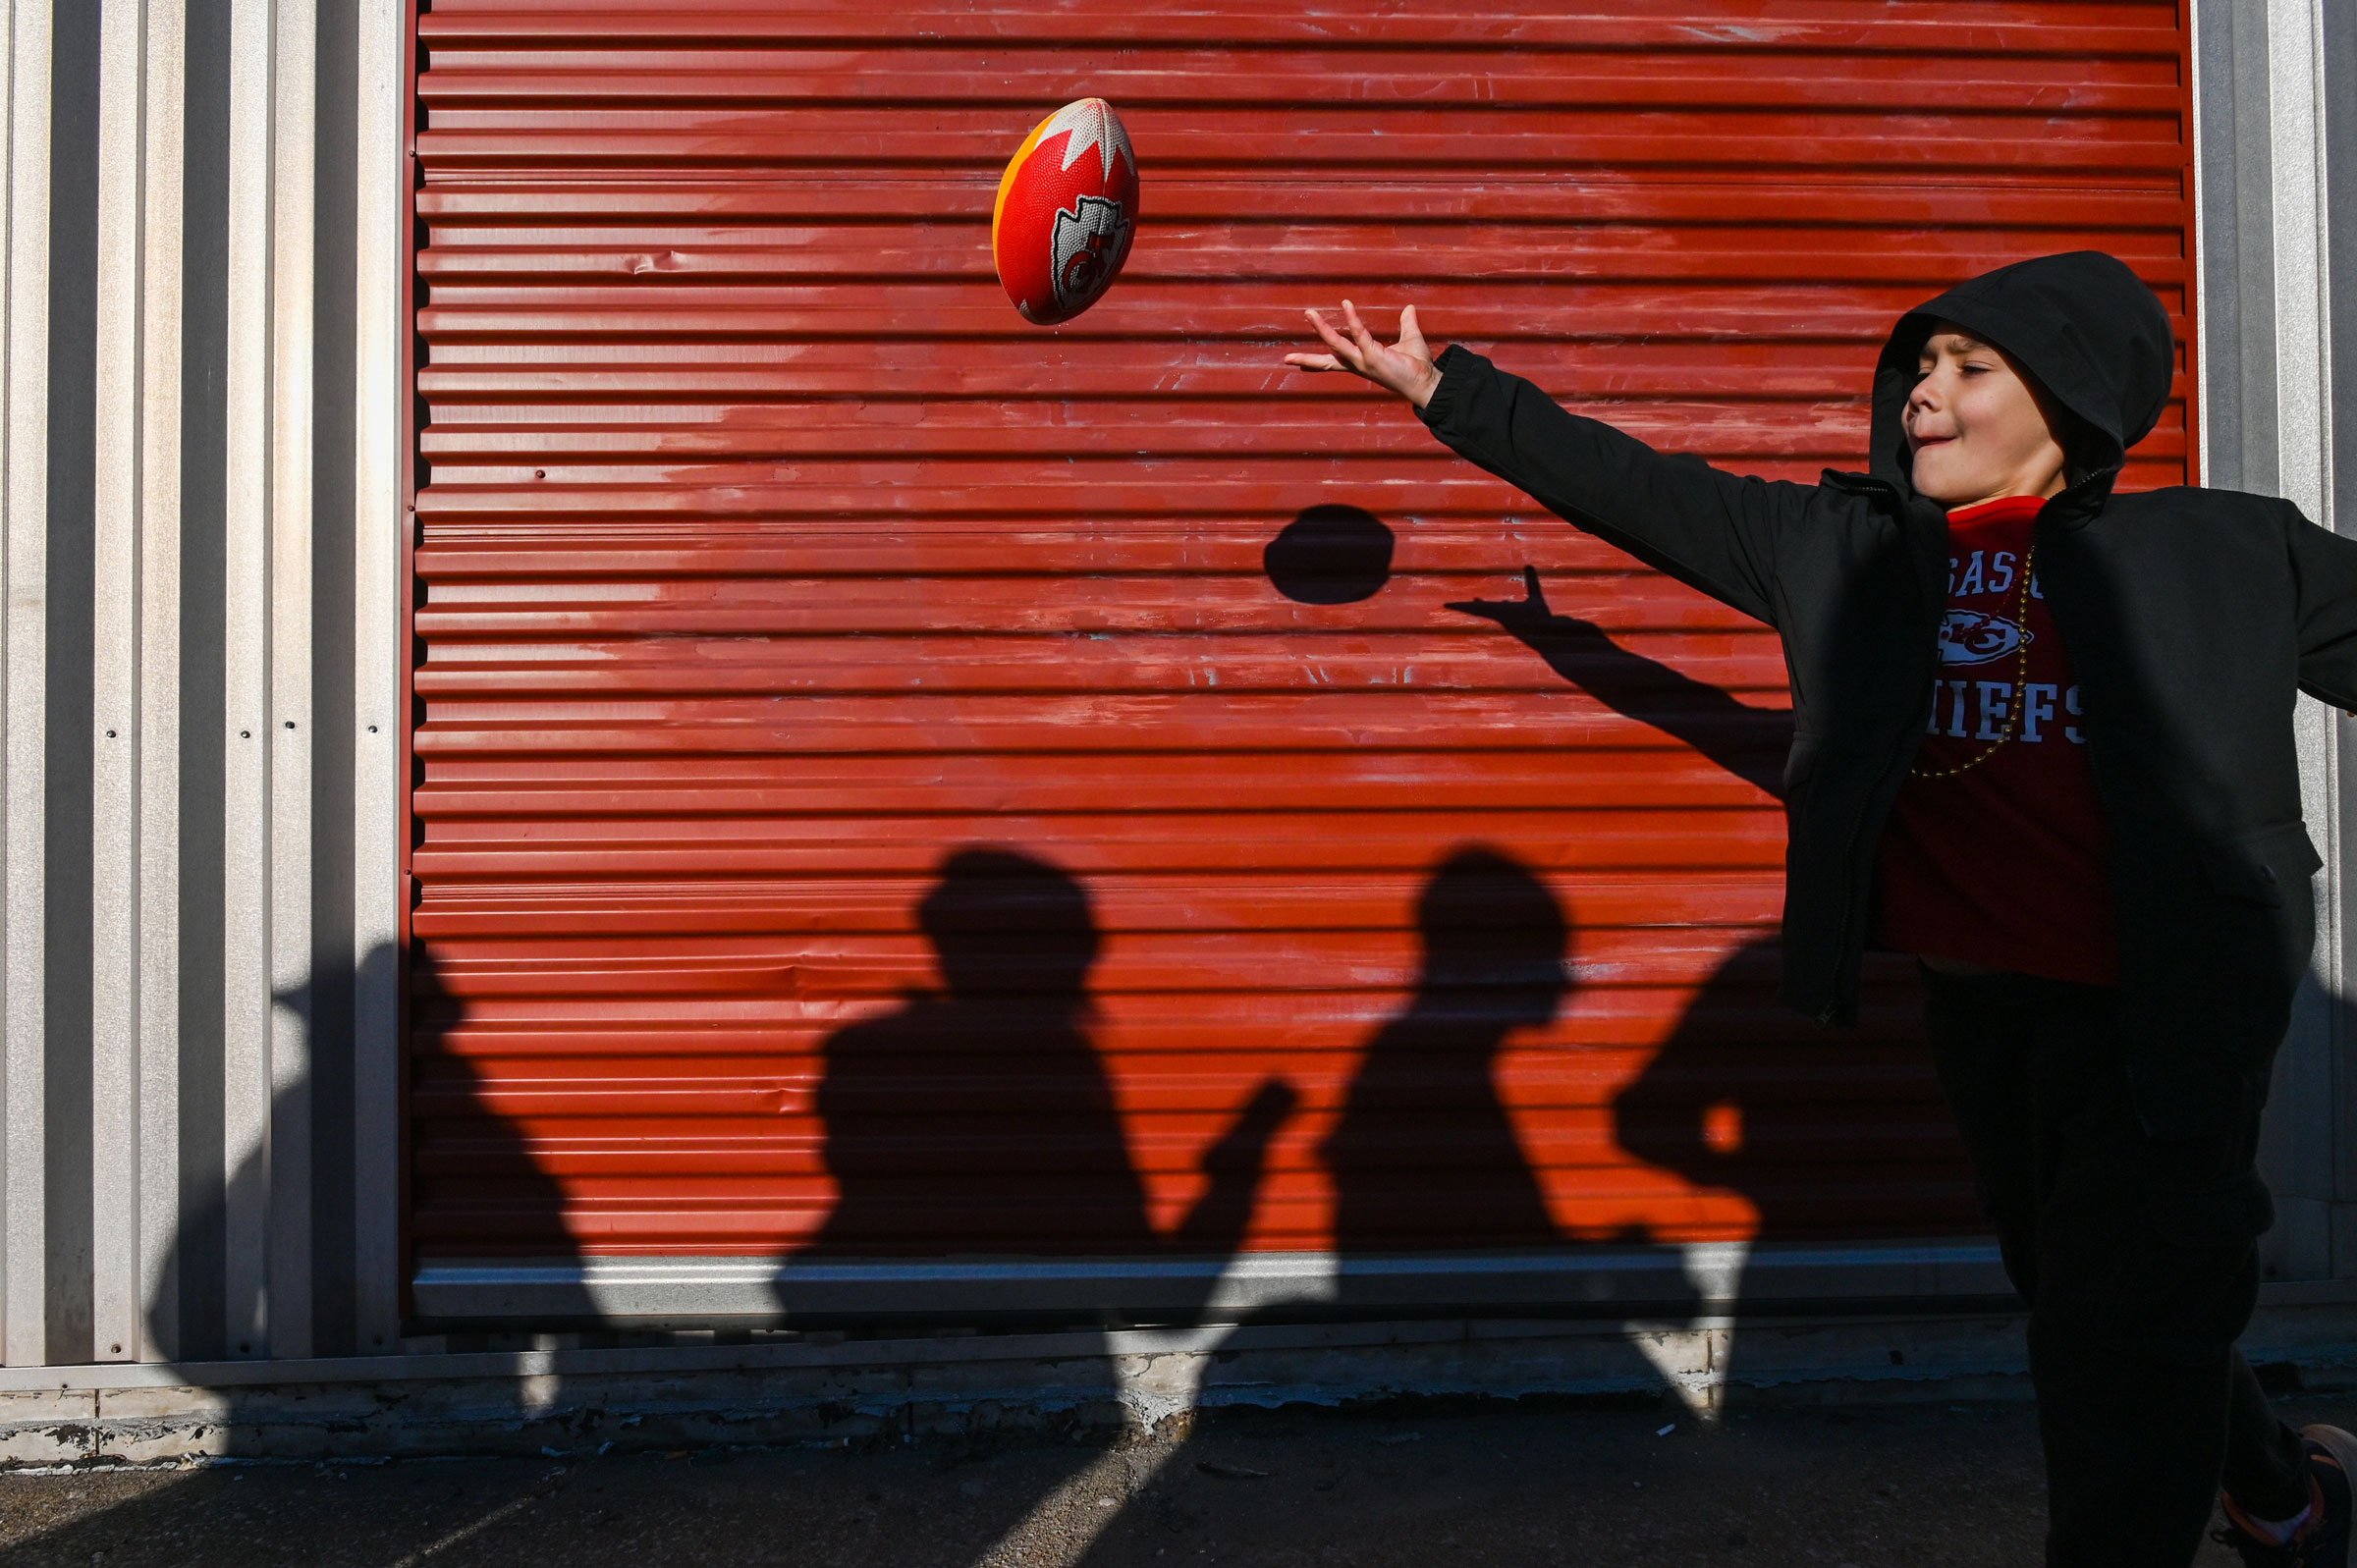 A fan plays football before the parade.